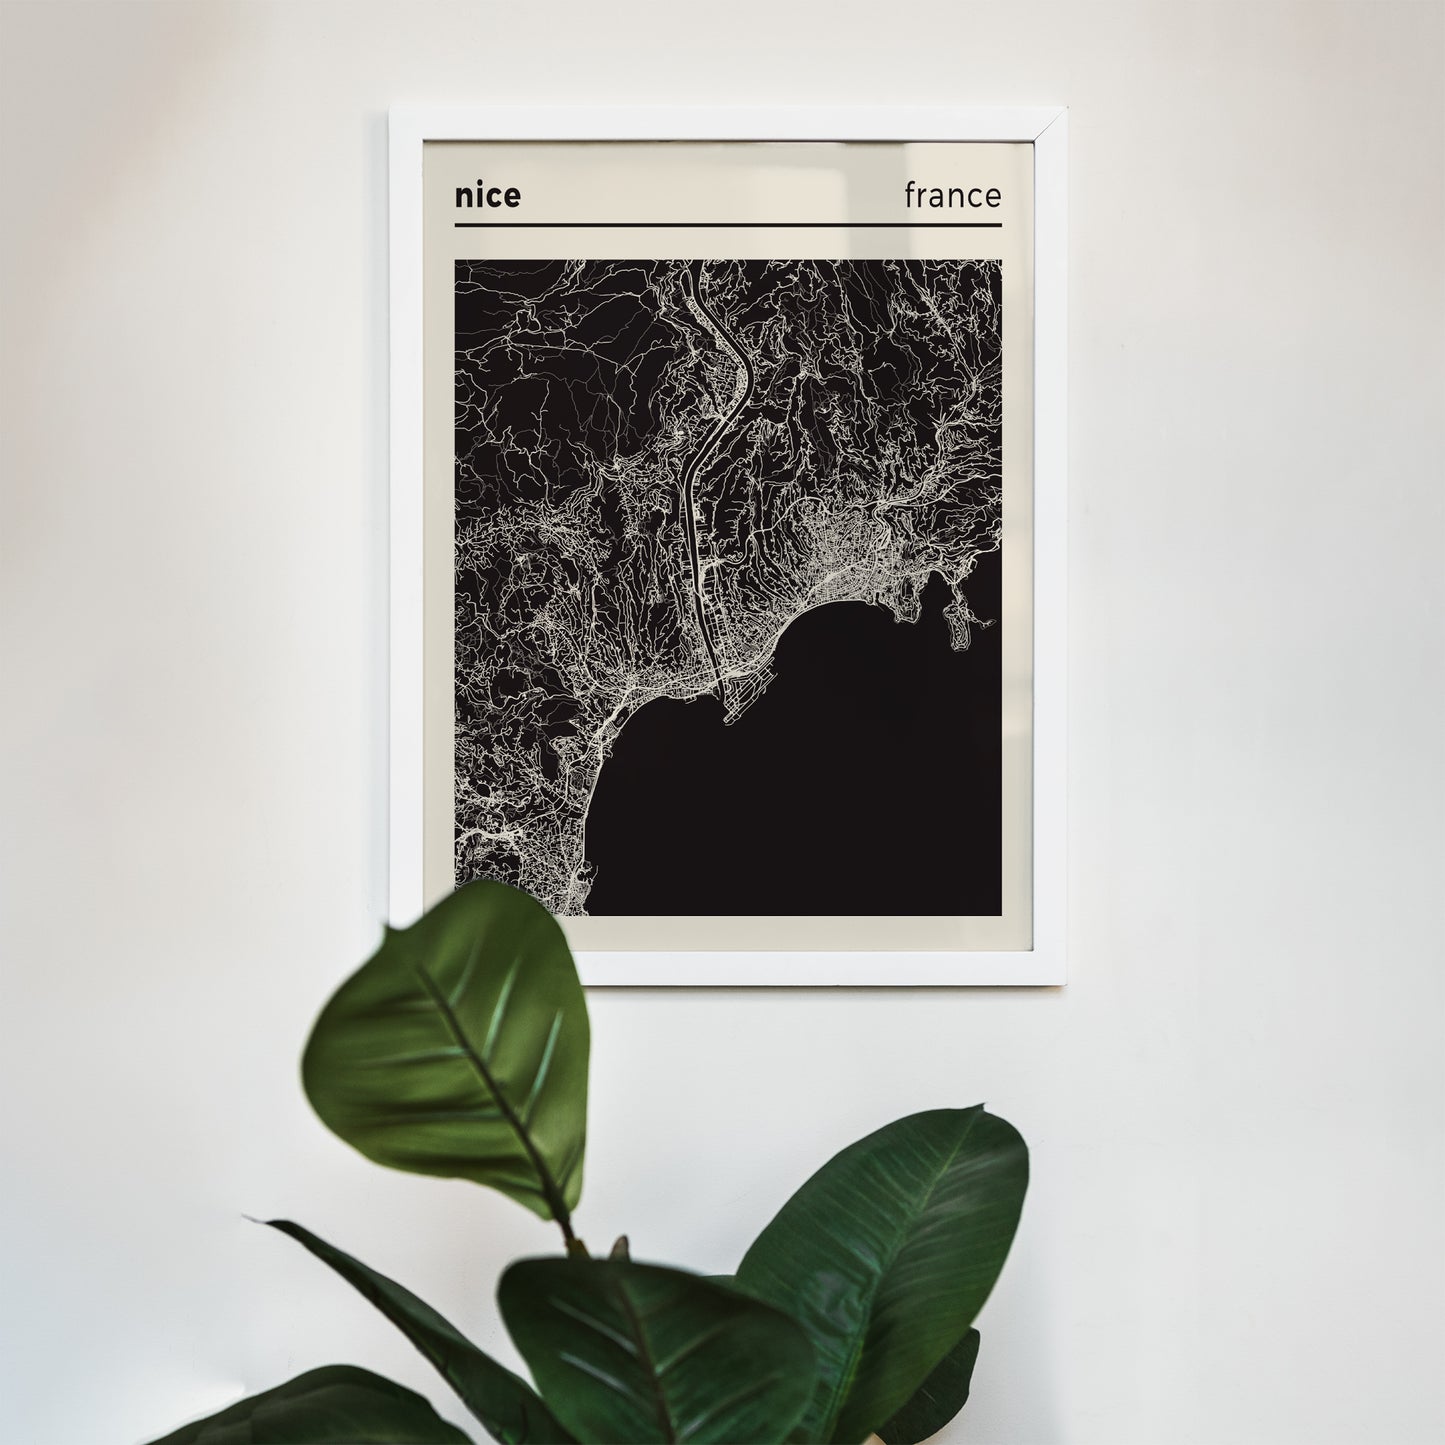 City of Nice, France - Map Poster